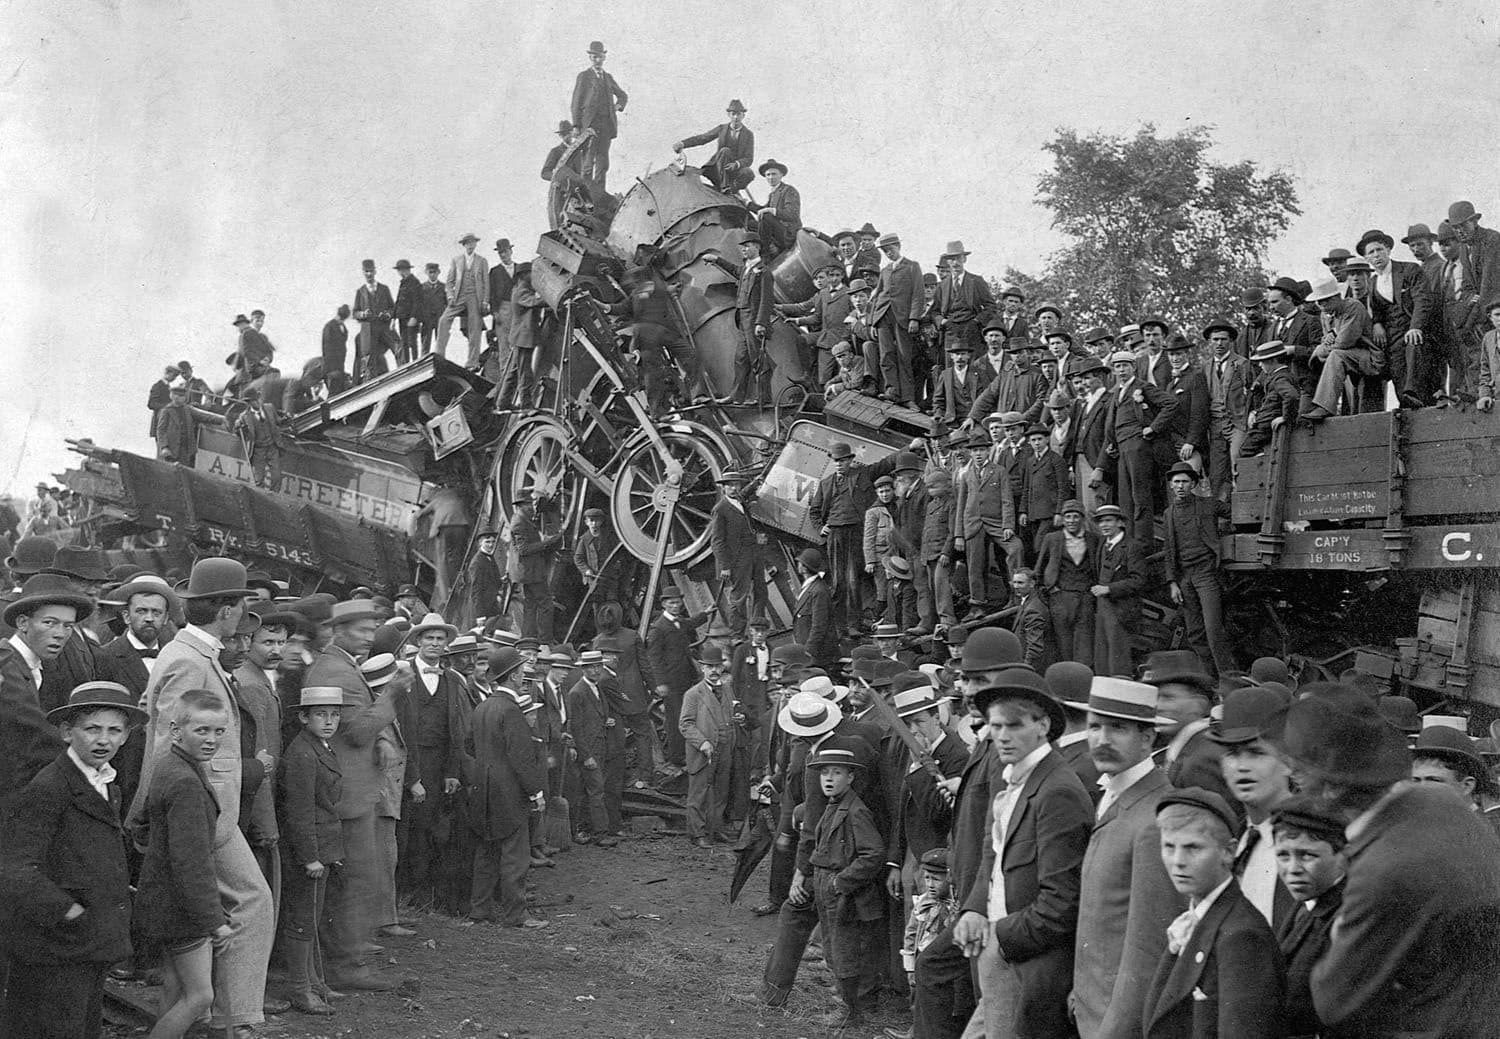 Men and boys pose with the wreckage of a train in Buckeye Park. Lancaster, Ohio, 1896.